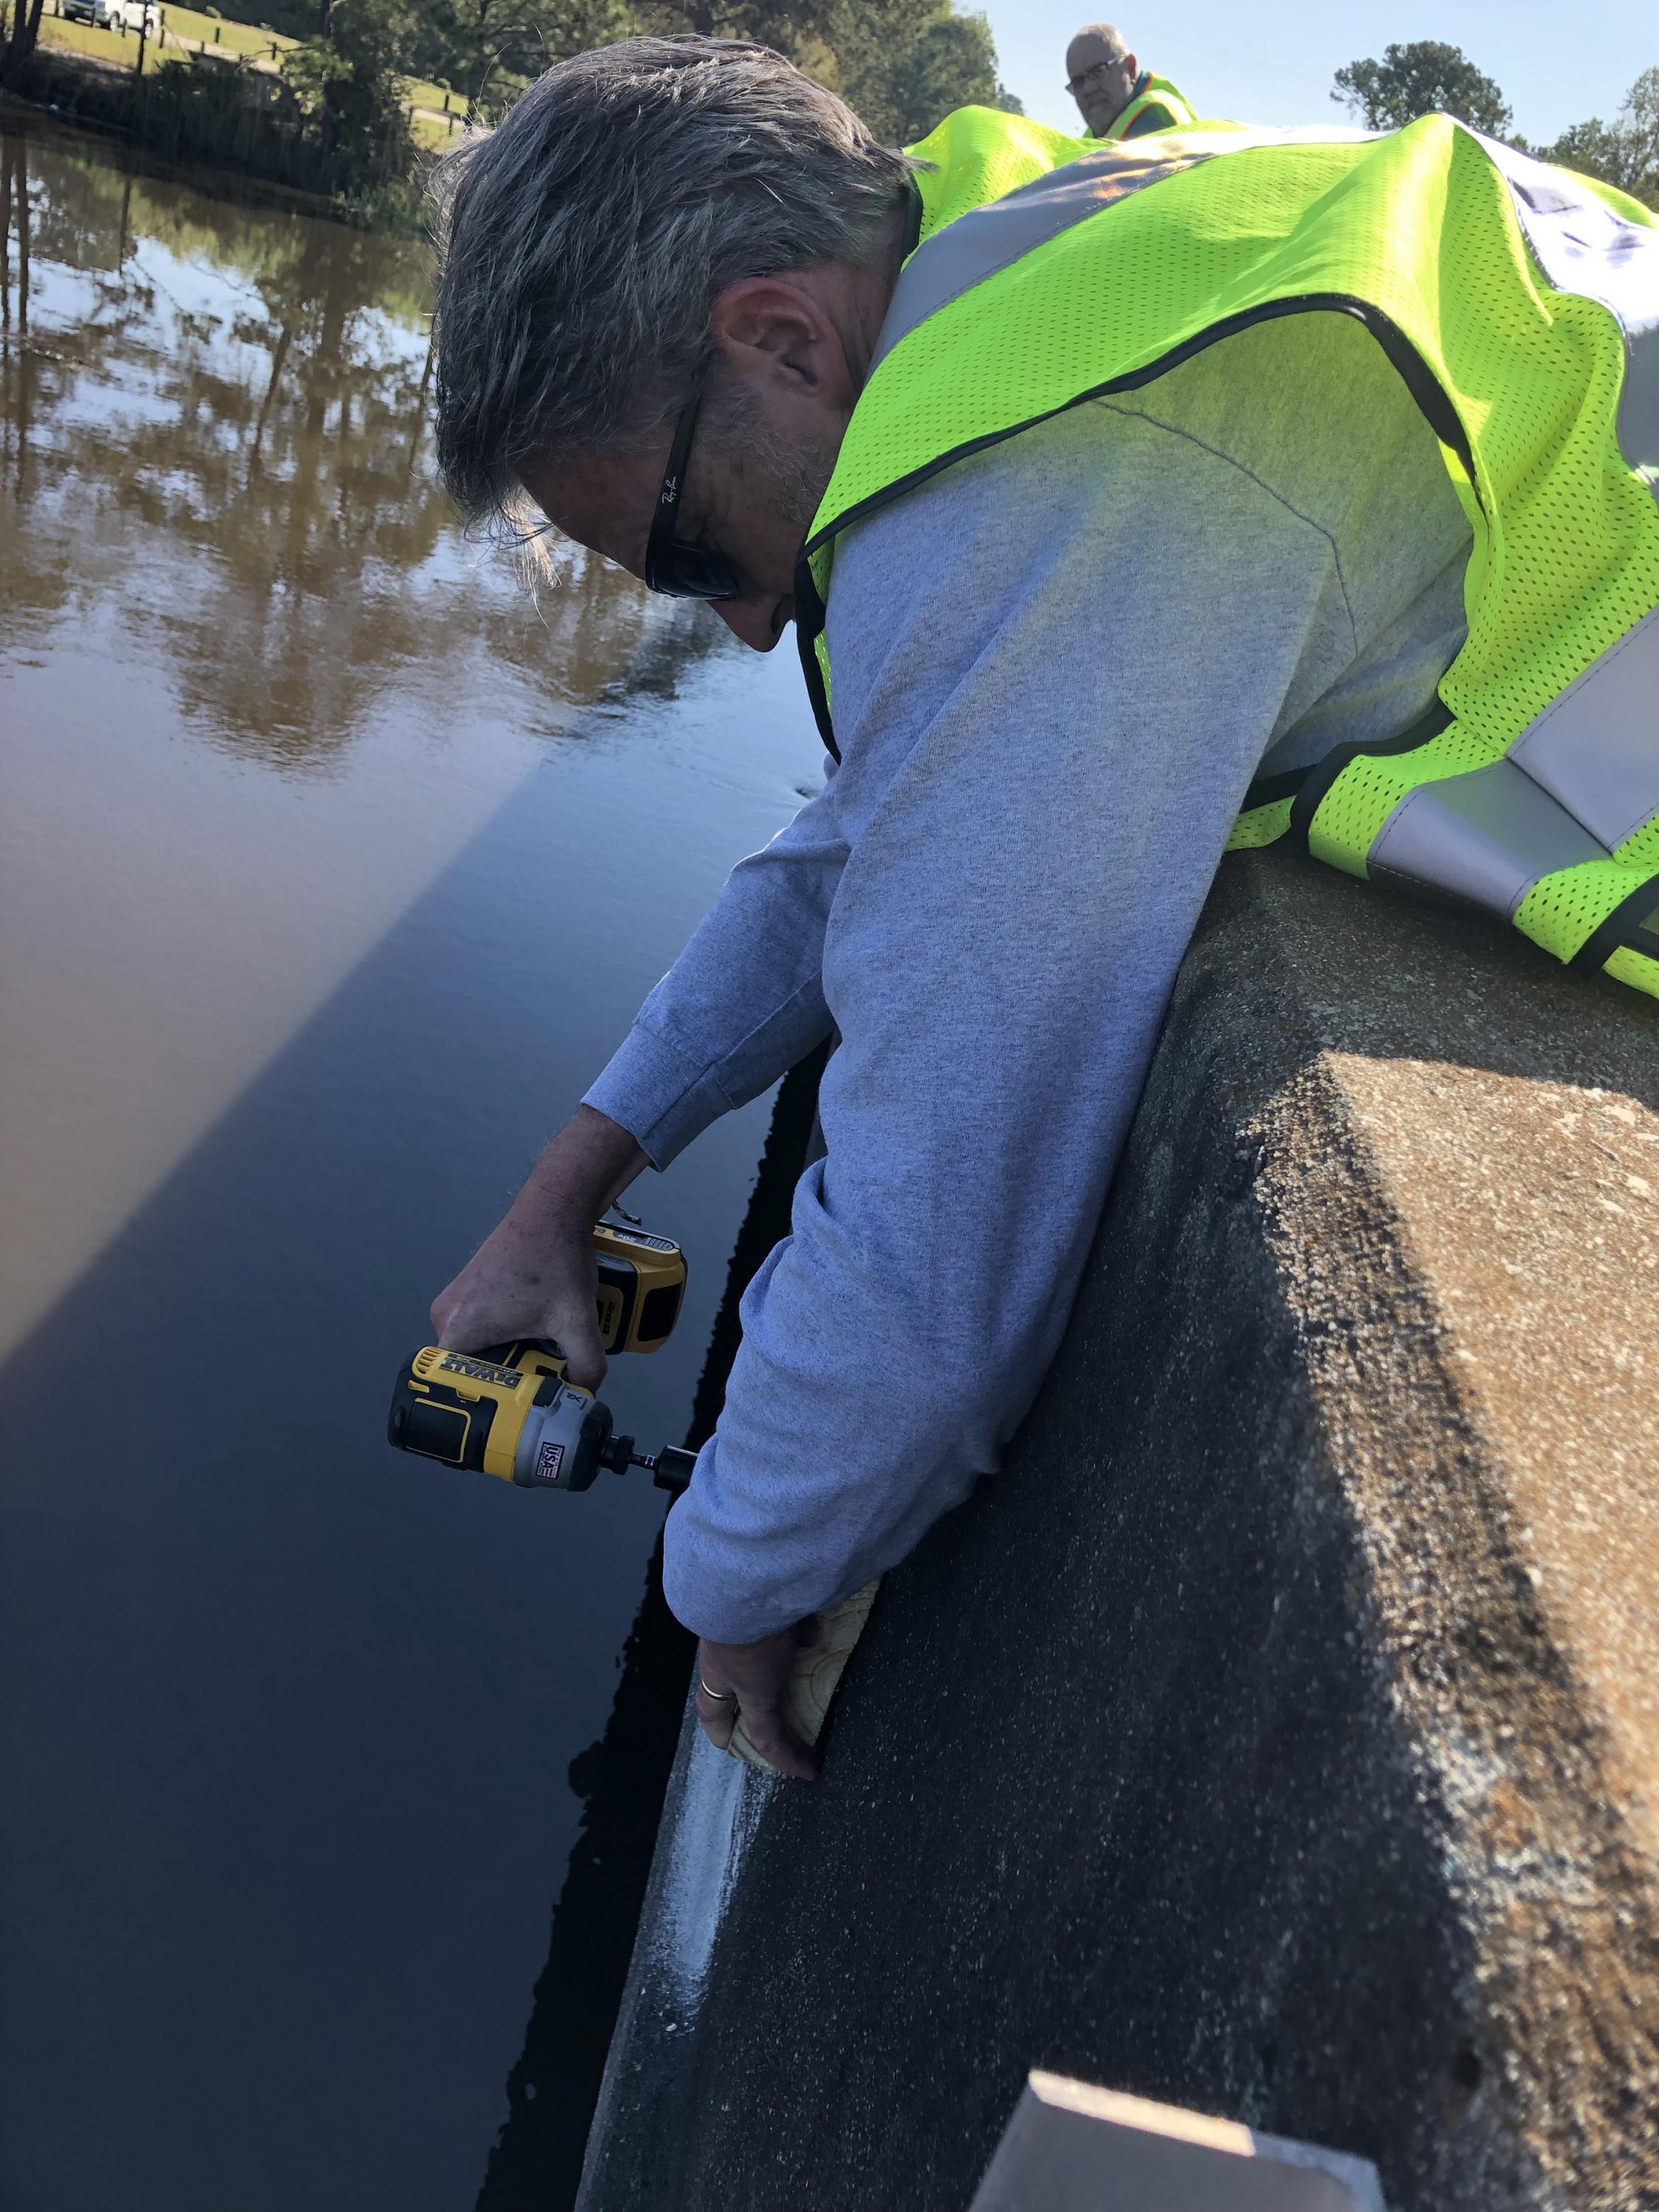 A sensor placed on the U.S. Highway 17 bridge in Chatham County will provide planners with detailed information about water levels during flooding conditions. (Credit: Chatham County)